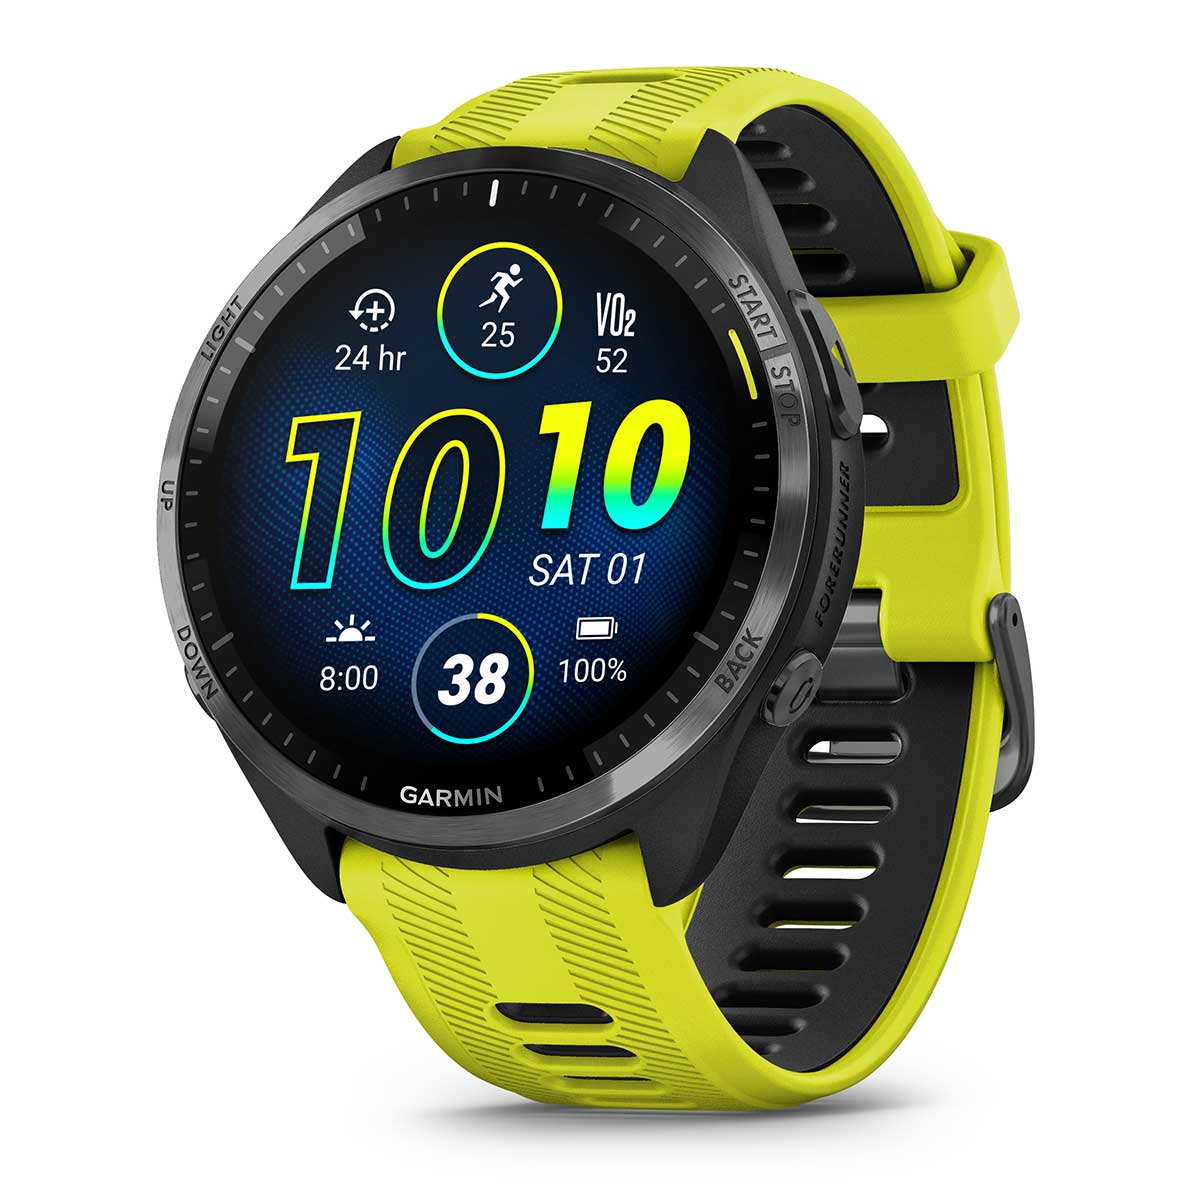 Garmin Forerunner 965 (Amp Yellow/Black) Premium Running & Triathlon GPS Smartwatch | Bundle with PlayBetter Screen Protectors & Portable Charger - image 2 of 7